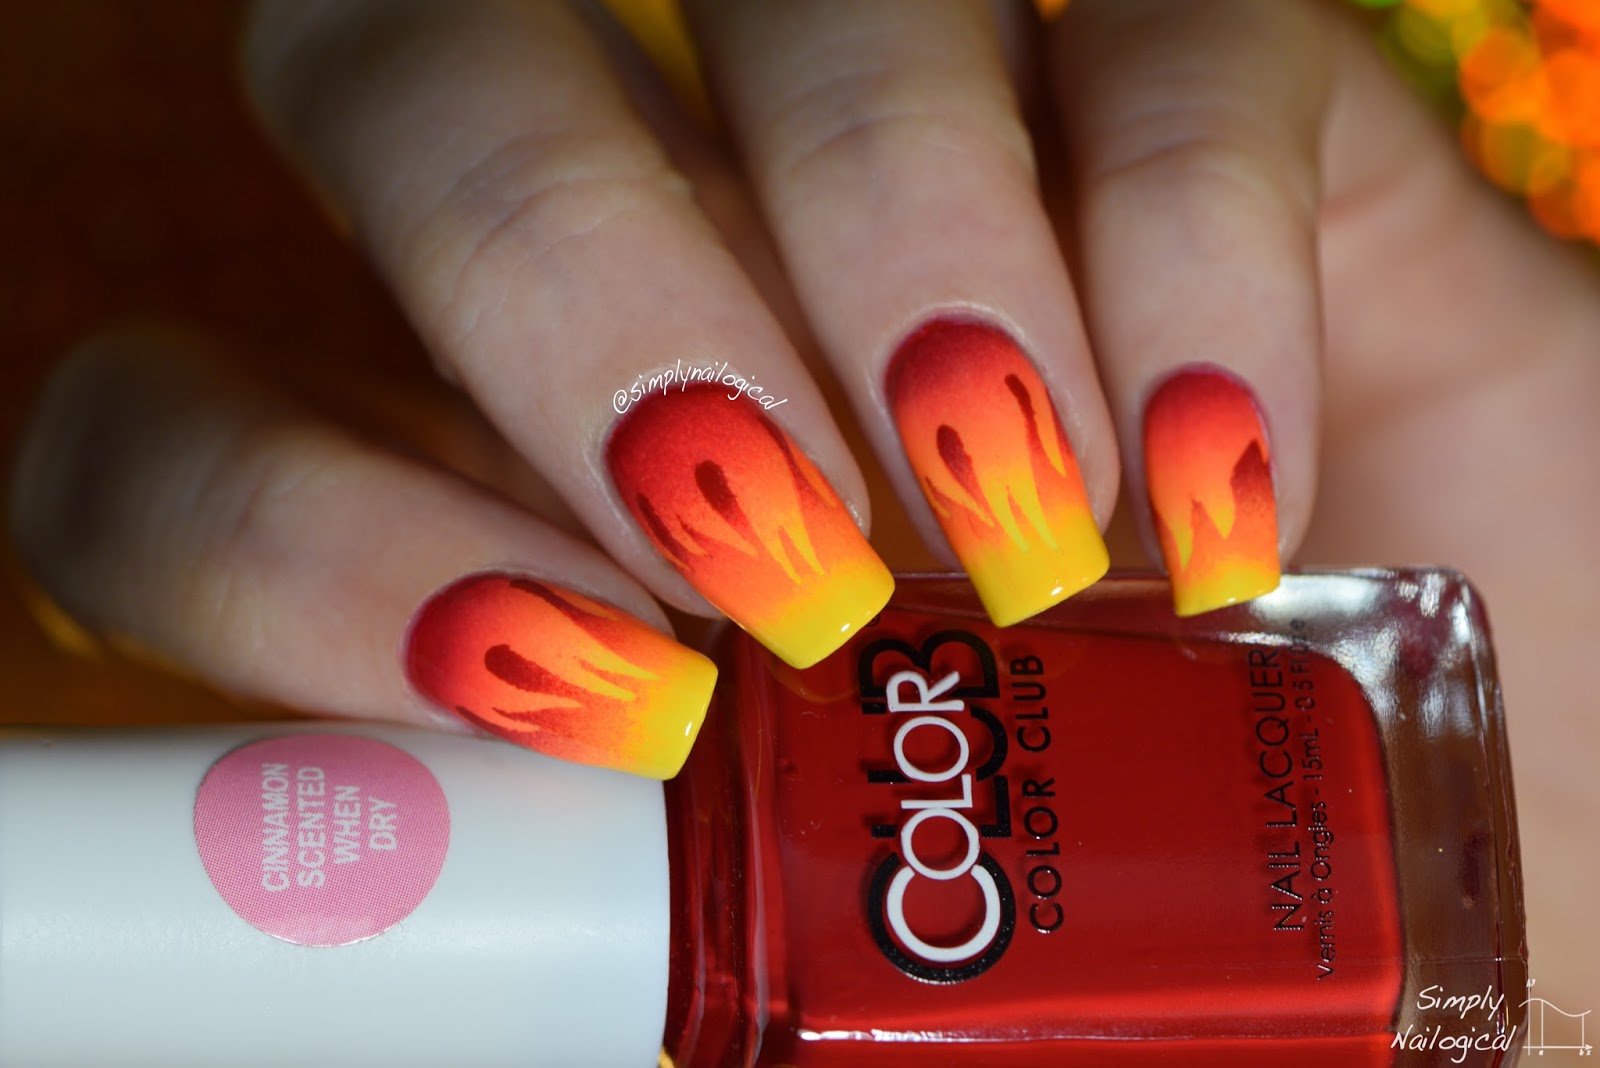 Simply Nailogical: Nails literally on fire / scaled gradient